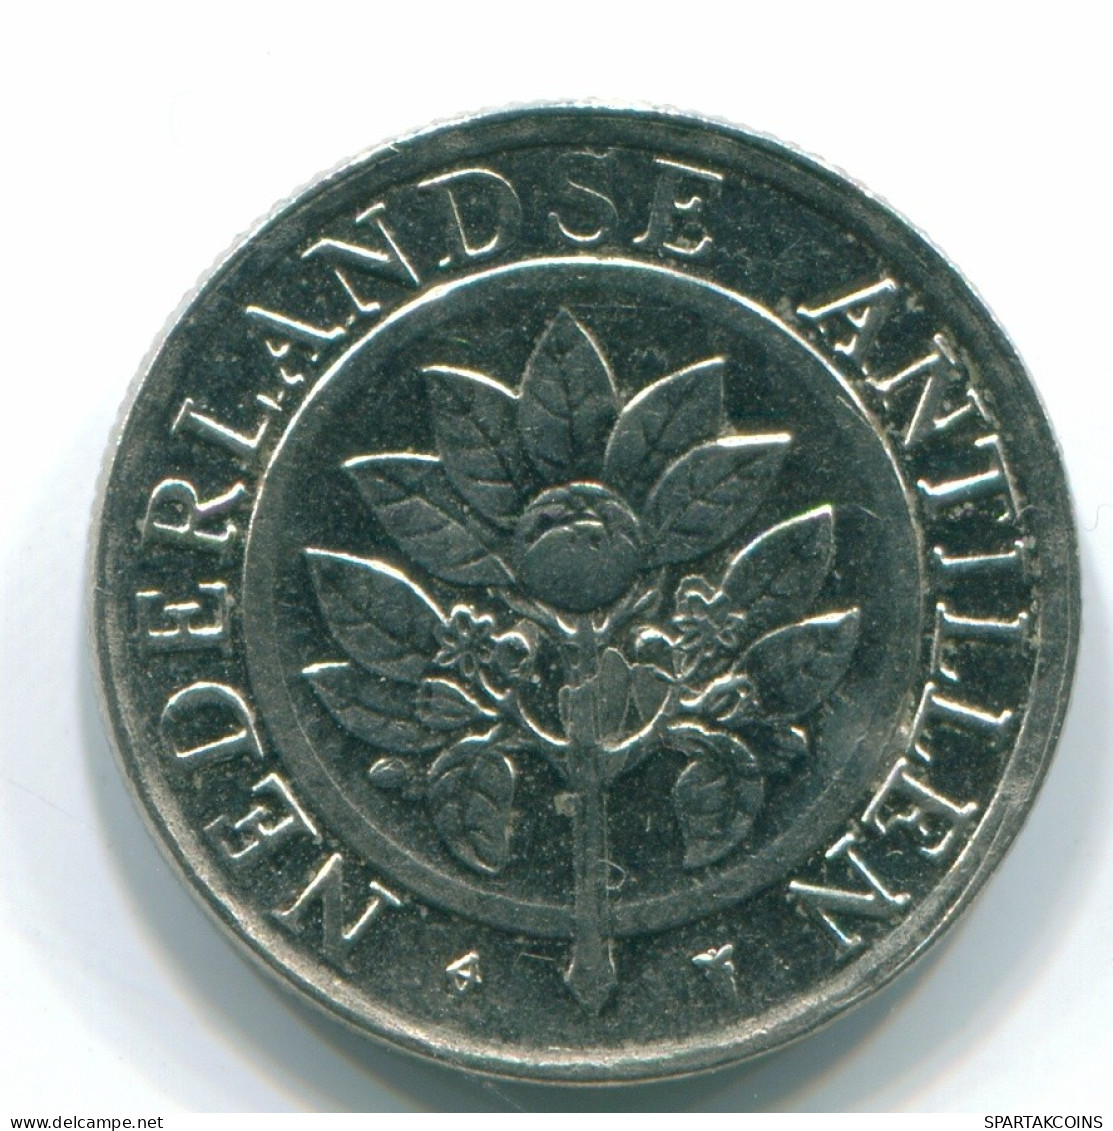 25 CENTS 1990 NETHERLANDS ANTILLES Nickel Colonial Coin #S11263.U.A - Netherlands Antilles